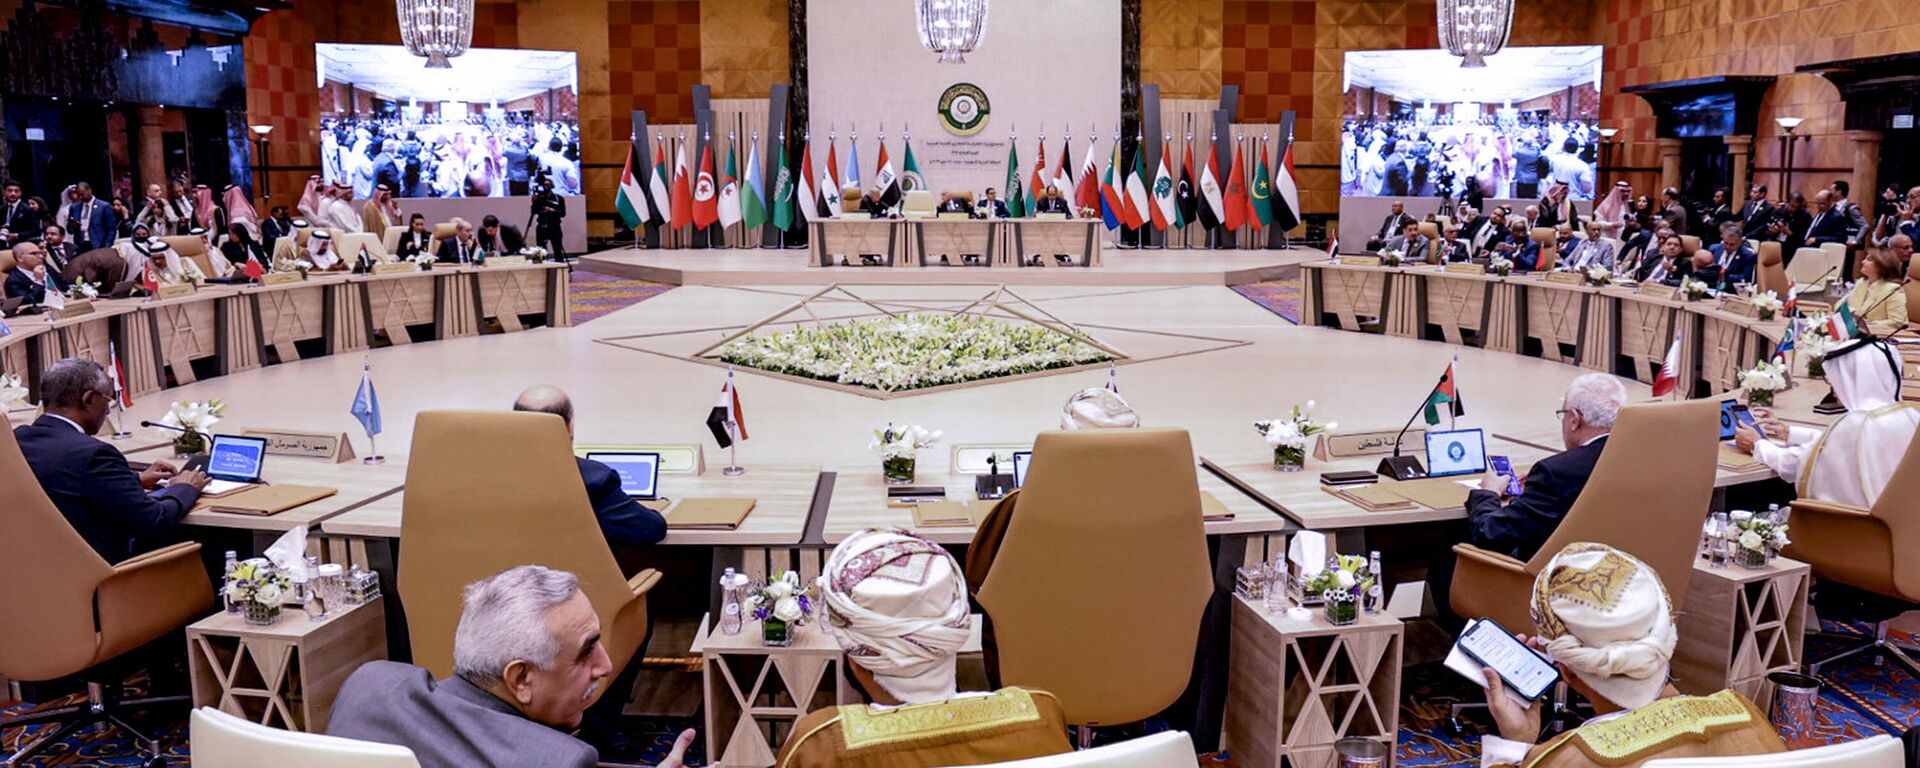 Delegates attend the Arab Foreign Ministers Preparatory Meeting ahead of the 32nd Arab League Summit in Jeddah on May 17, 2023 - Sputnik International, 1920, 19.05.2023